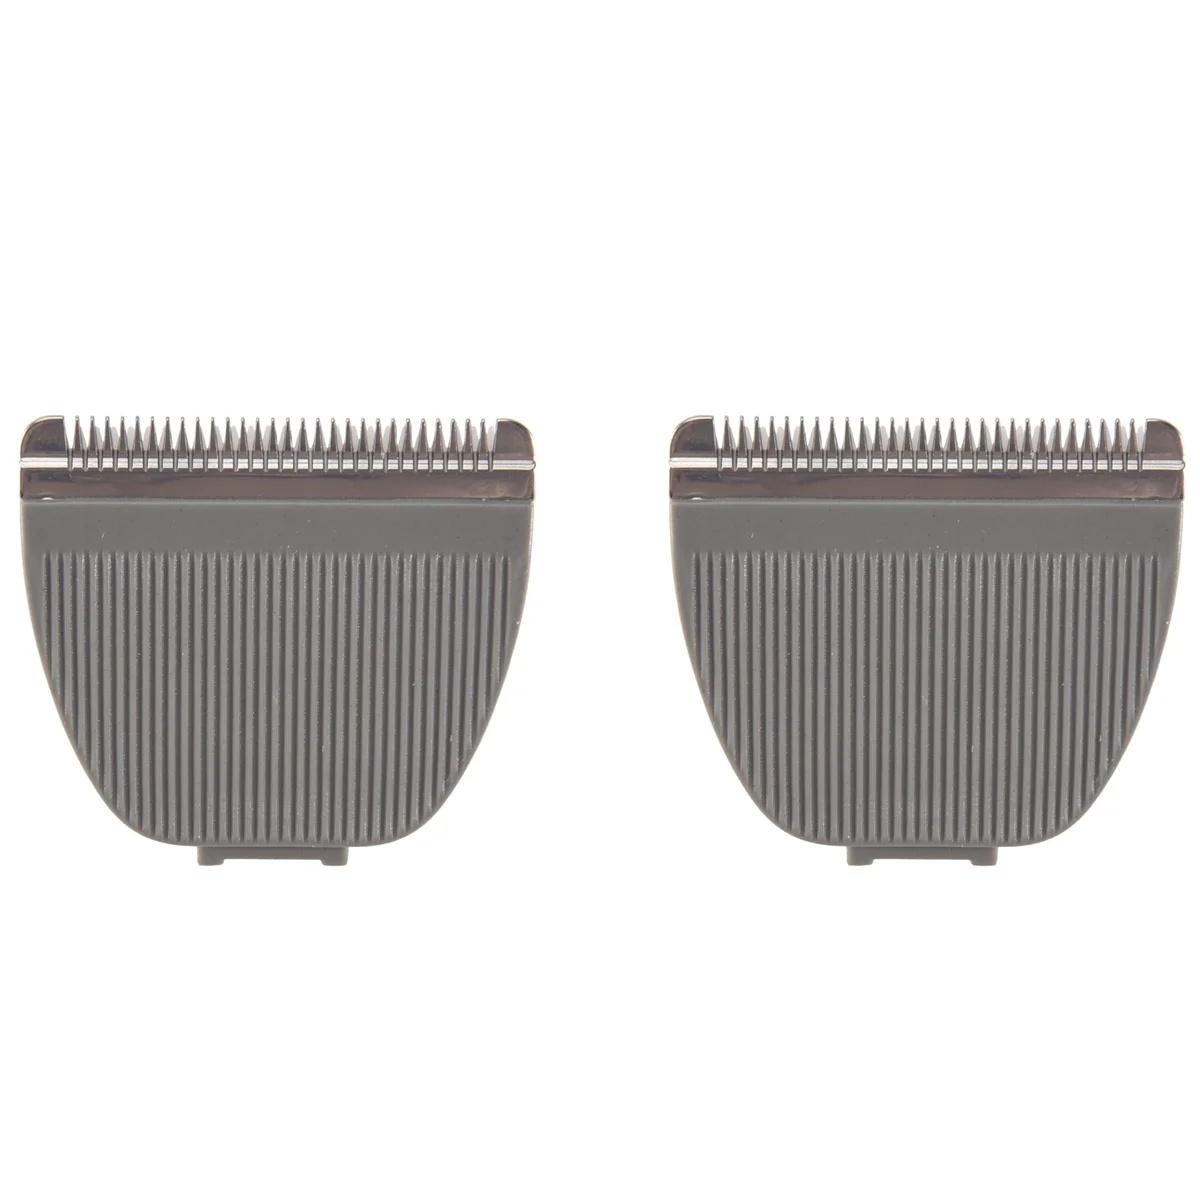 

2 Pcs Hair Clipper Replacement Blade for Codos CP-6800 KP-3000 CP-5500,Grey